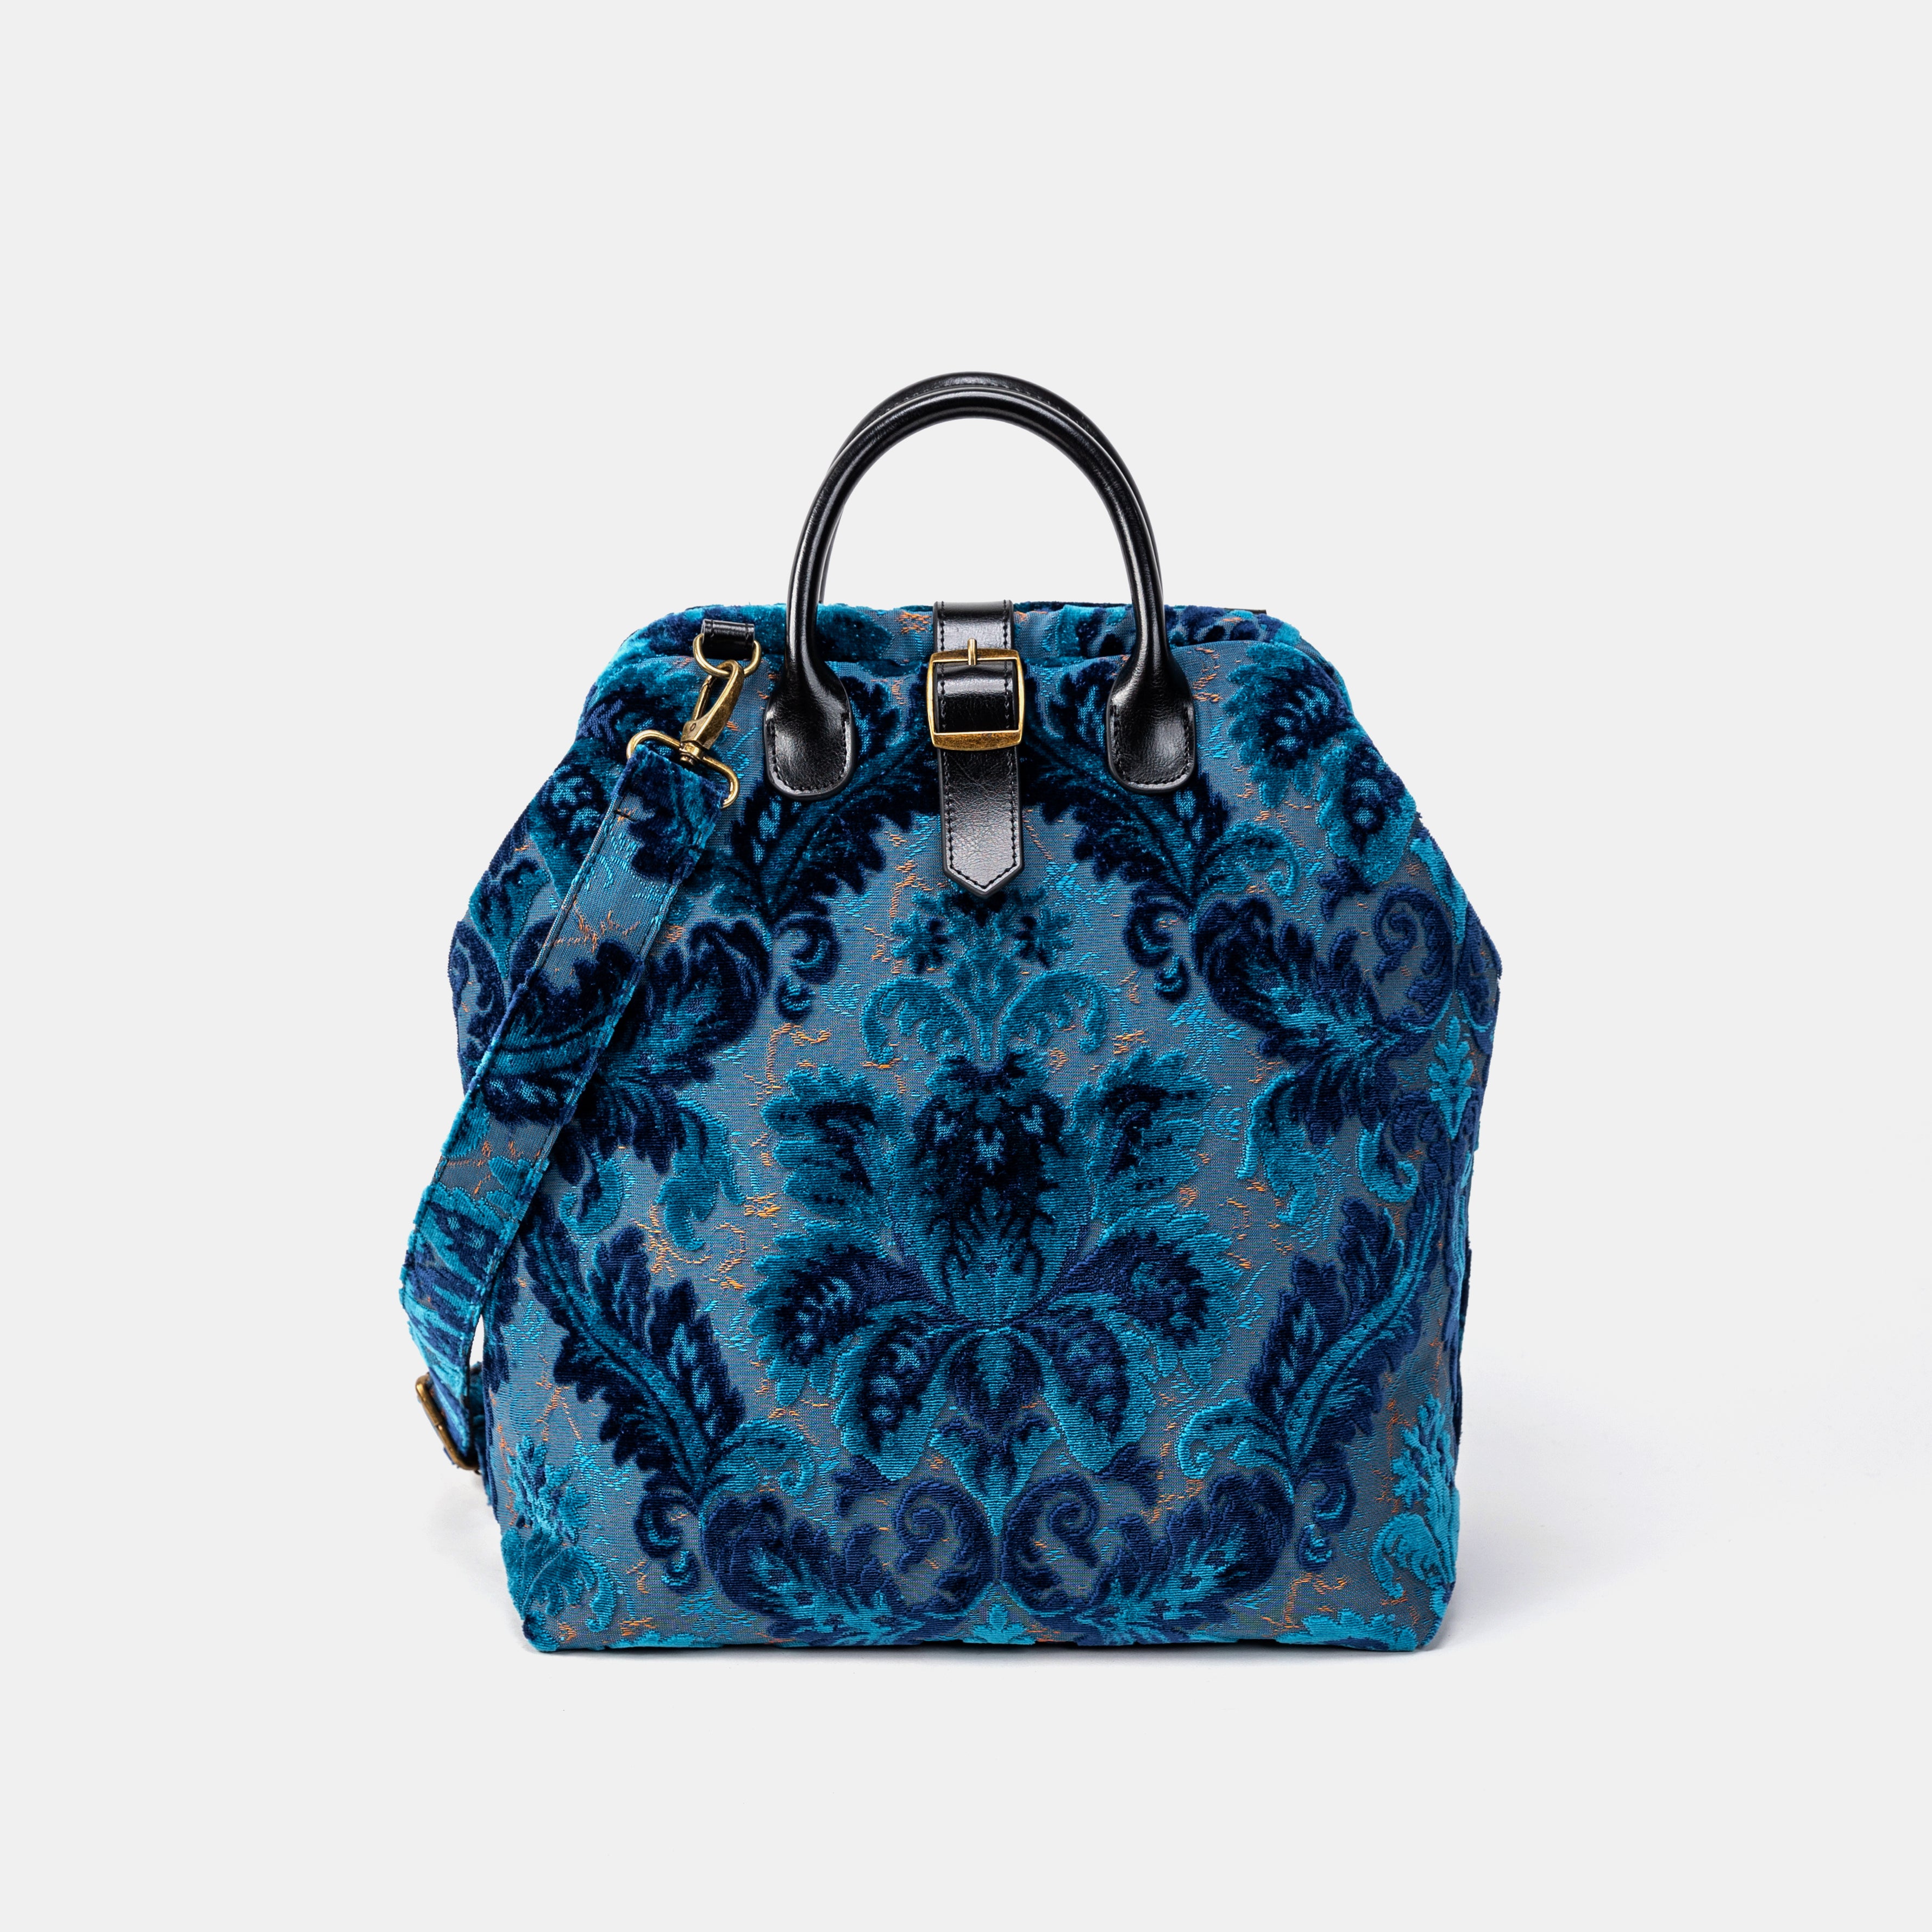 Revival aqua Carpet Laptop Backpack Mary Poppins Bag with strap